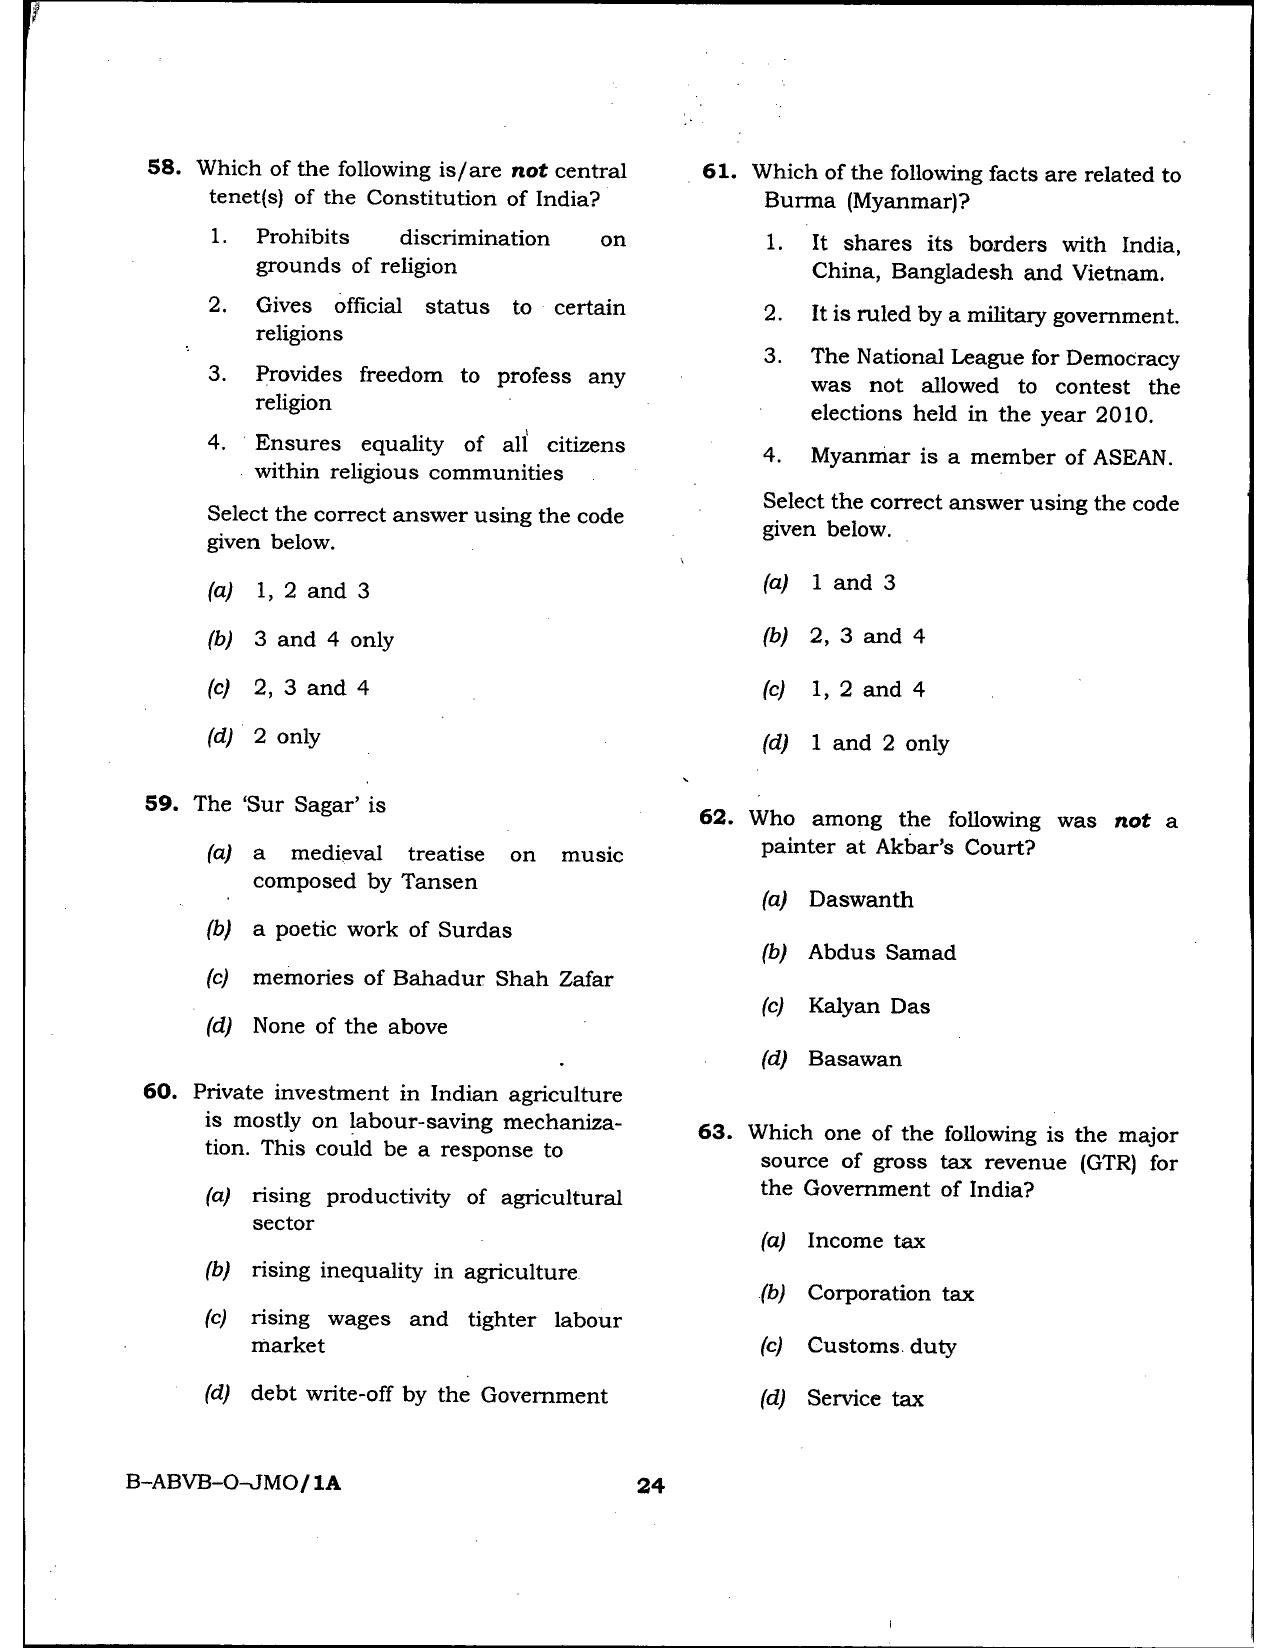 HPSSSB Fitter Model Papers: General Knowledge - Page 24